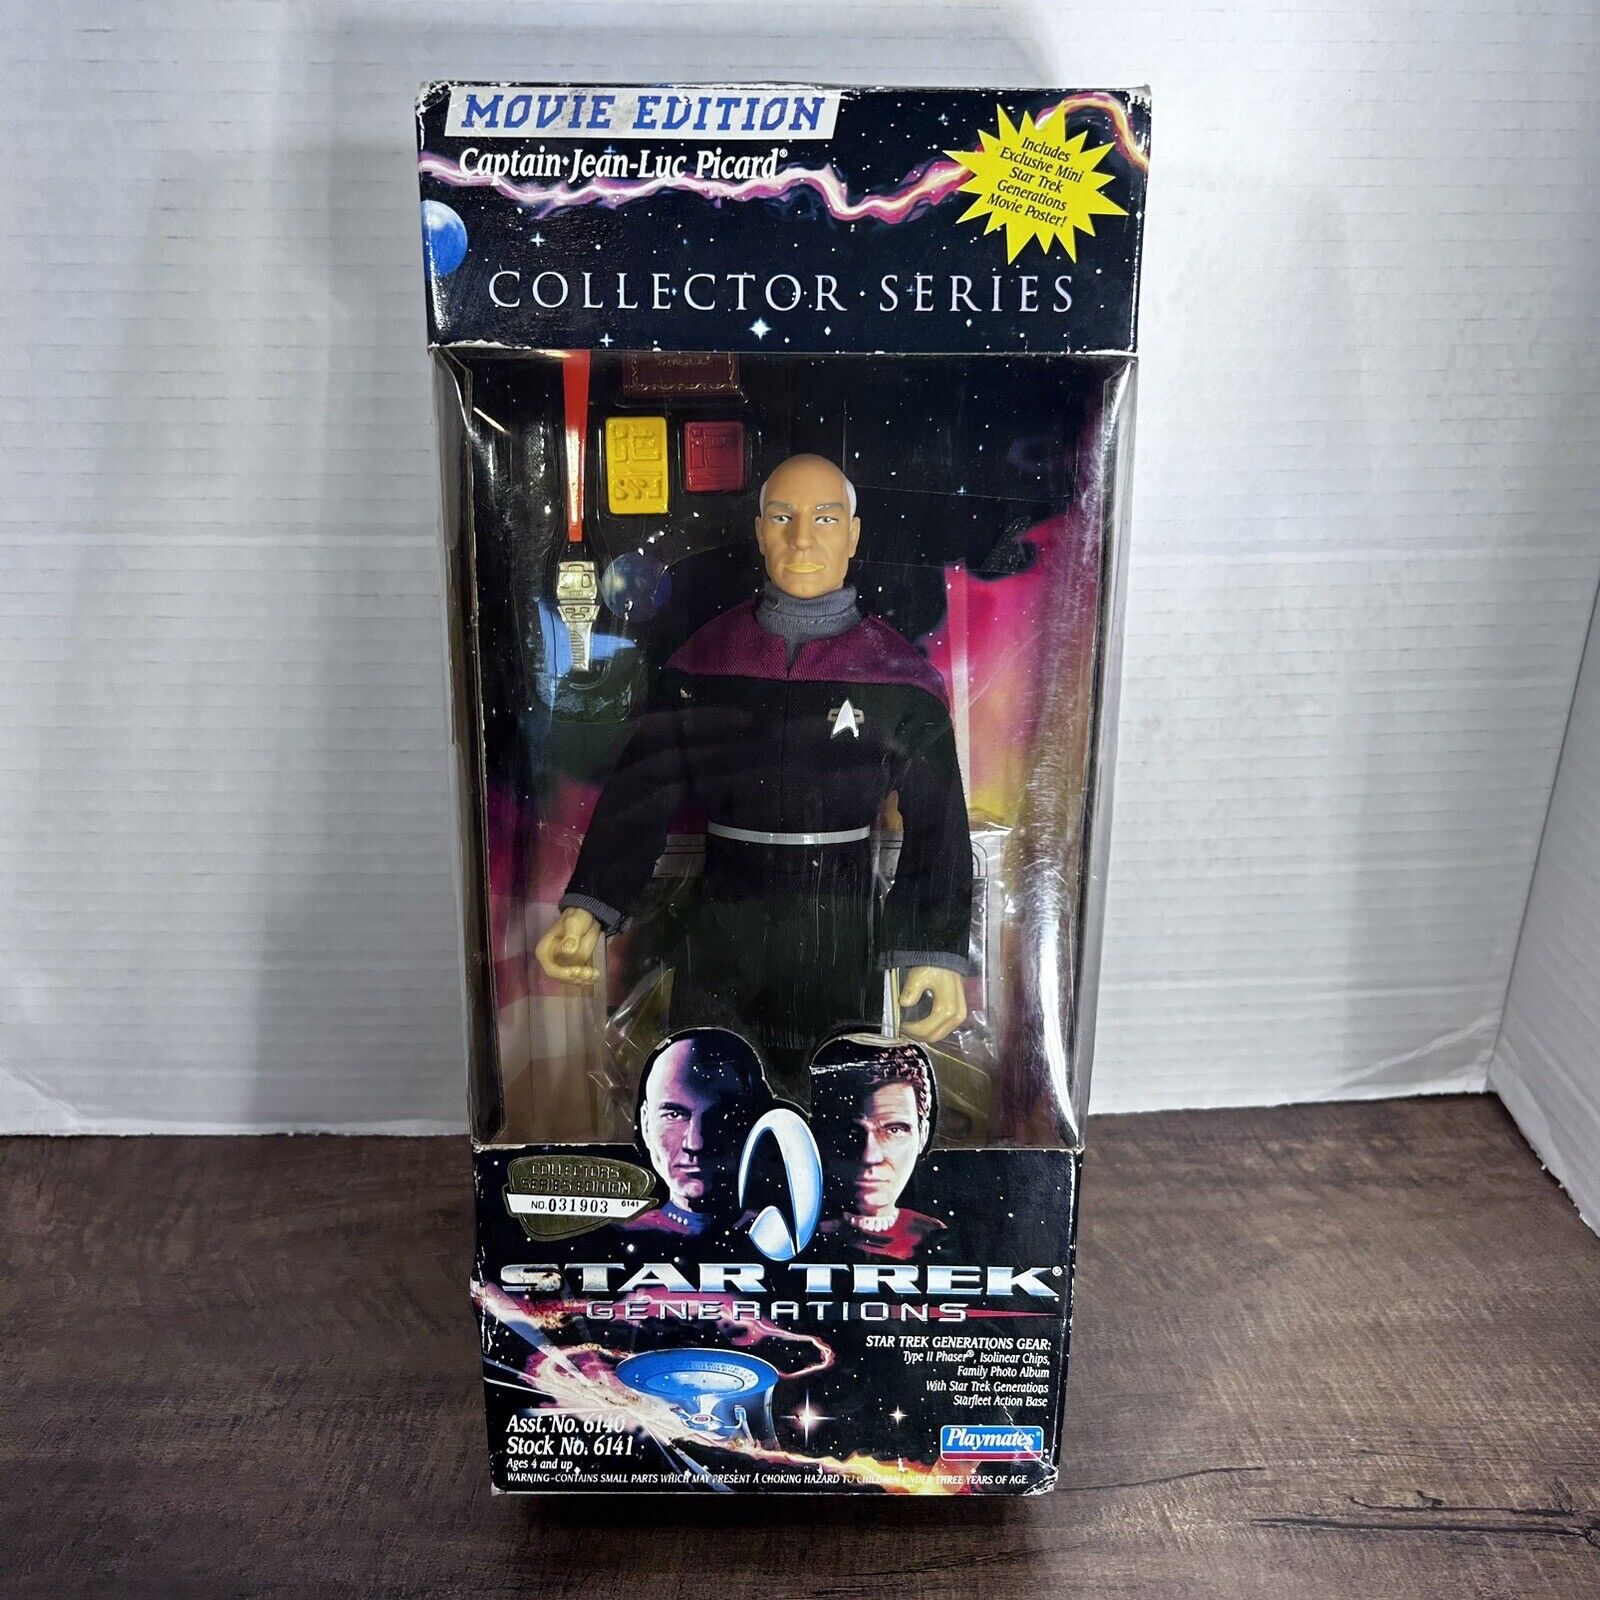 New Star Trek Generations Collector Series: Capt. Jean-Luc Picard Movie Edition